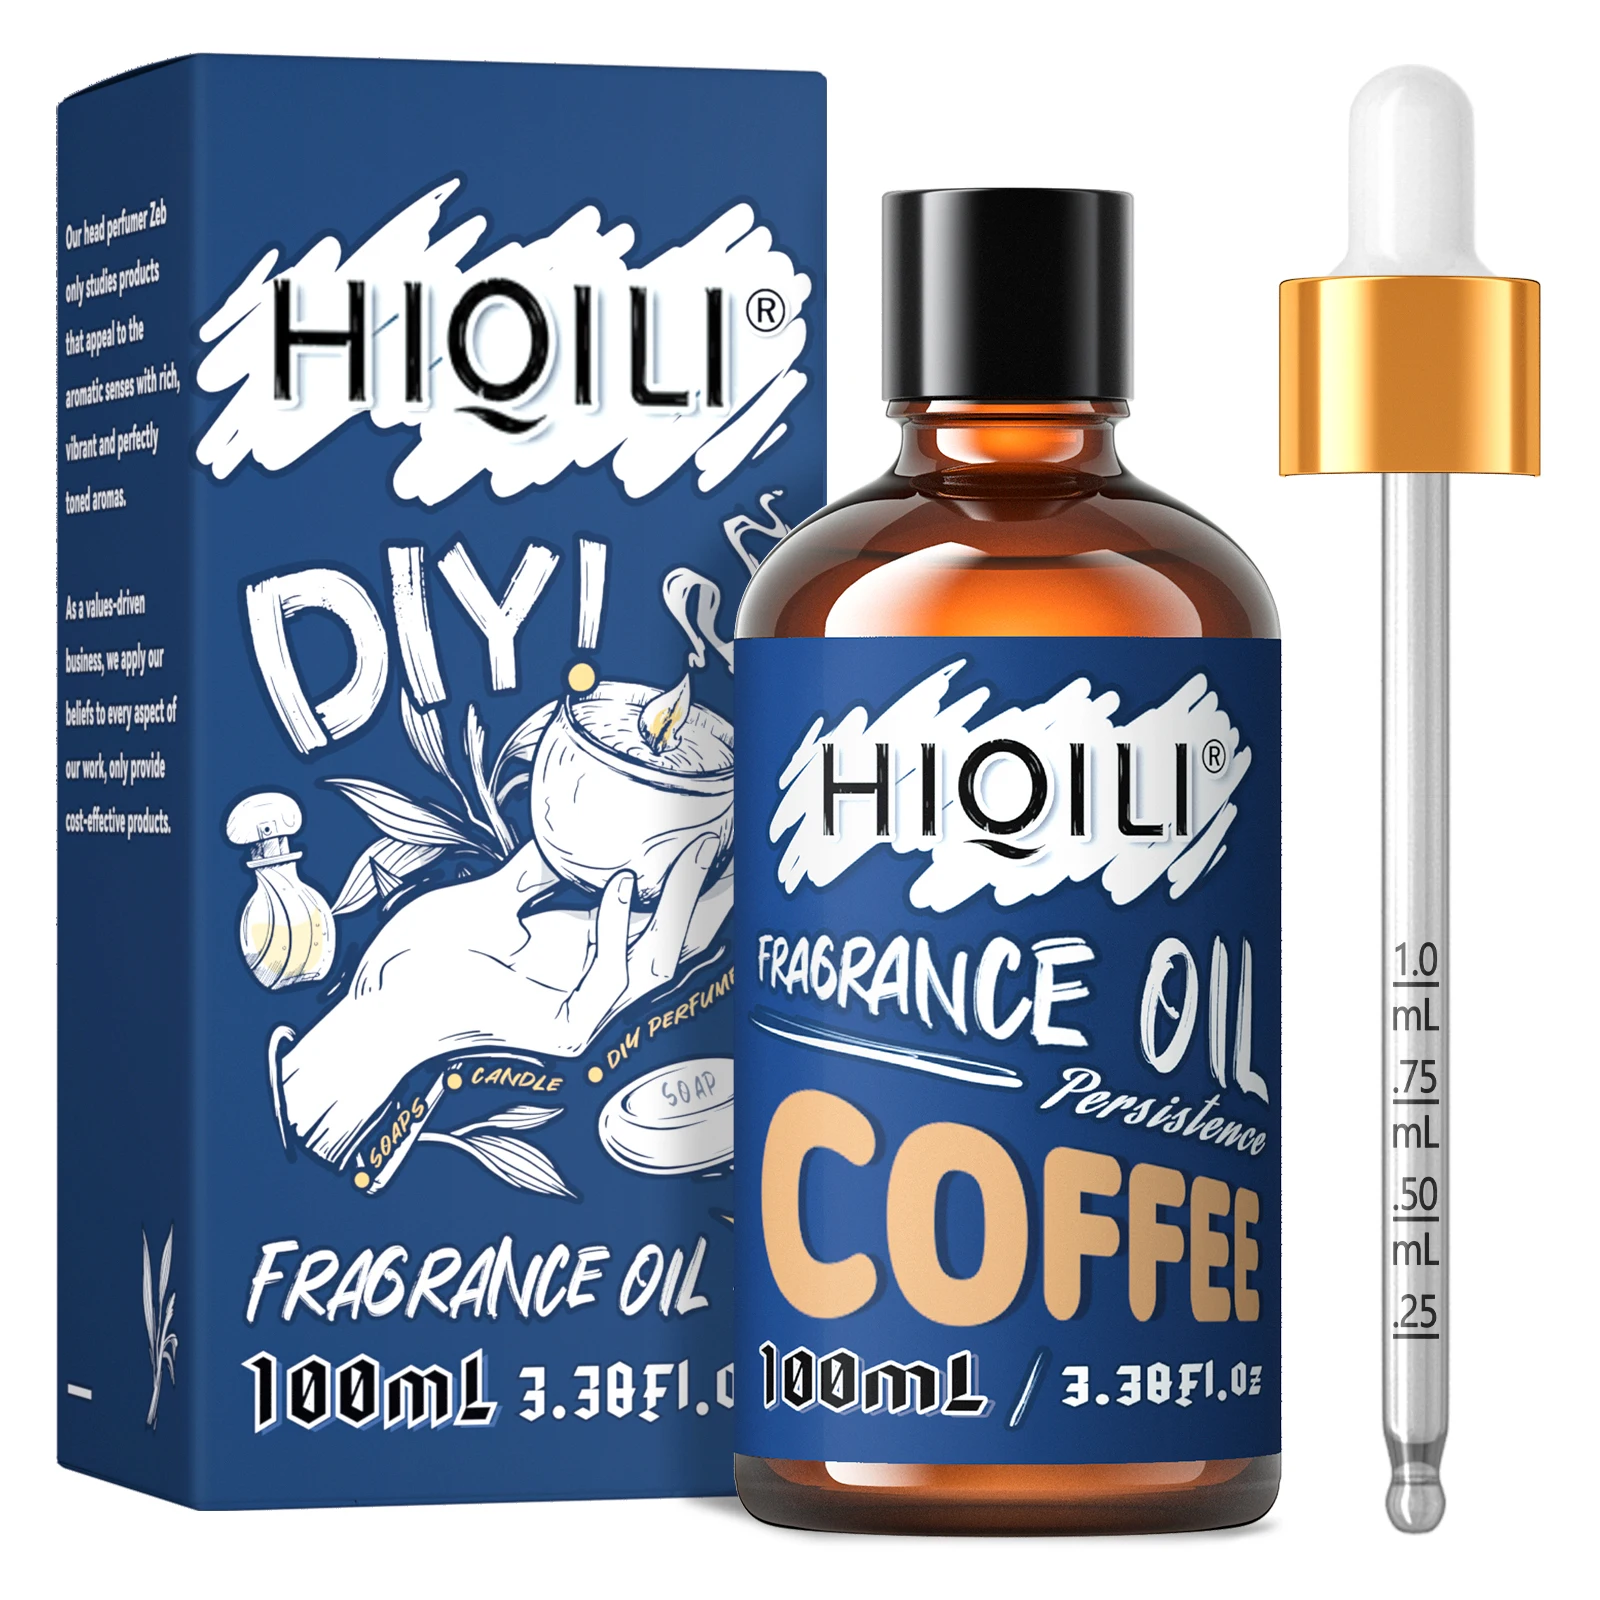 Coffee Fragrance Oils, HIQILI 100ML 100% Pure Oil For Aromatherapy,Car Diffuser,Humidifier,Room Spray,Candle Making,Gift,DIY diffuser nano steaming face 300ml double spray air humidifier fragrance diffuser usb ultrasonic essential oils aromatherapy